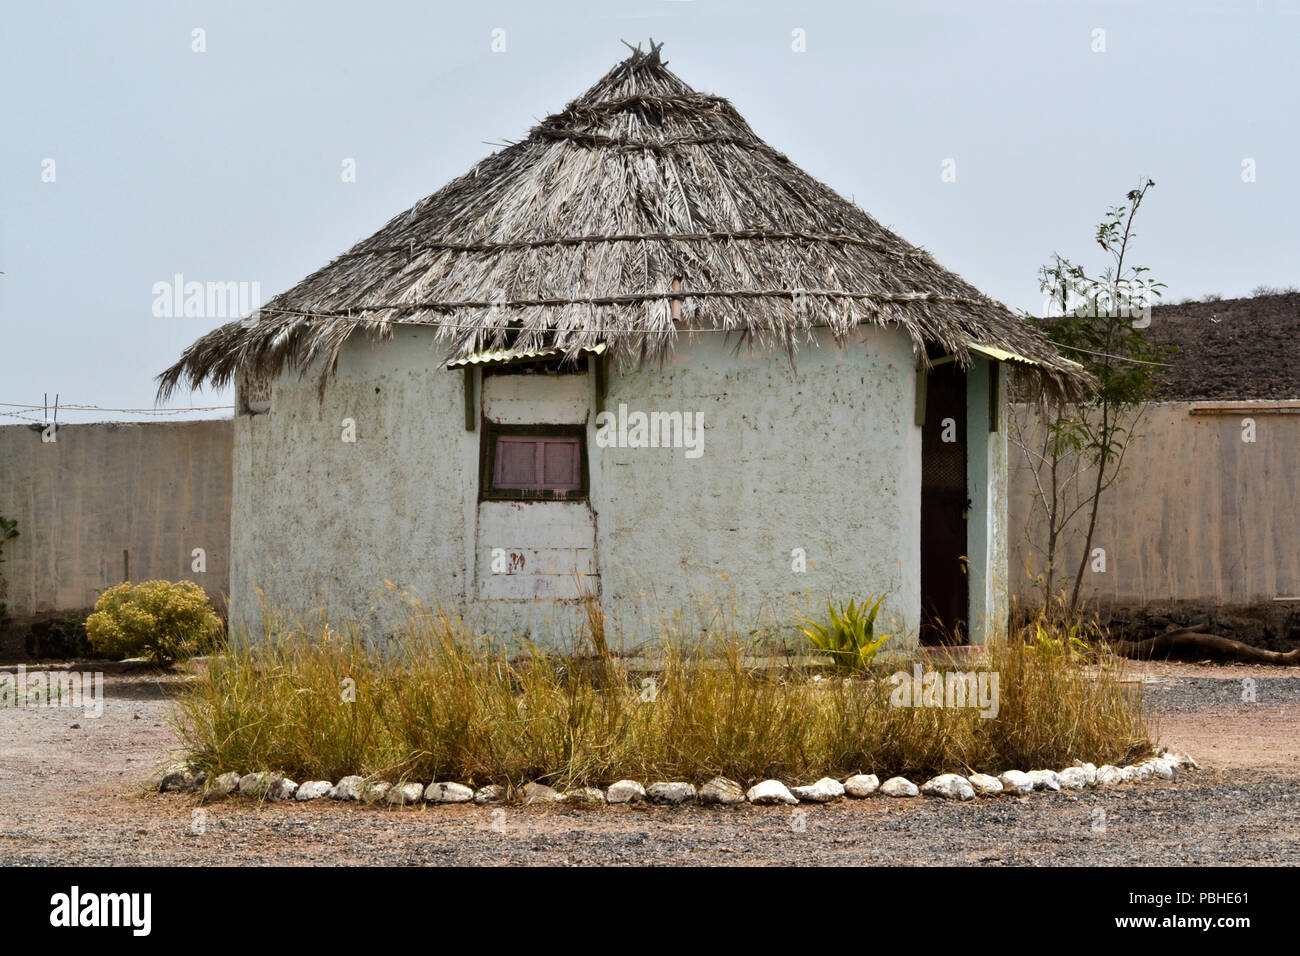 Rounded Djiboutian huts in a village in Arta Region, Djibouti Horn of Africa Stock Photo